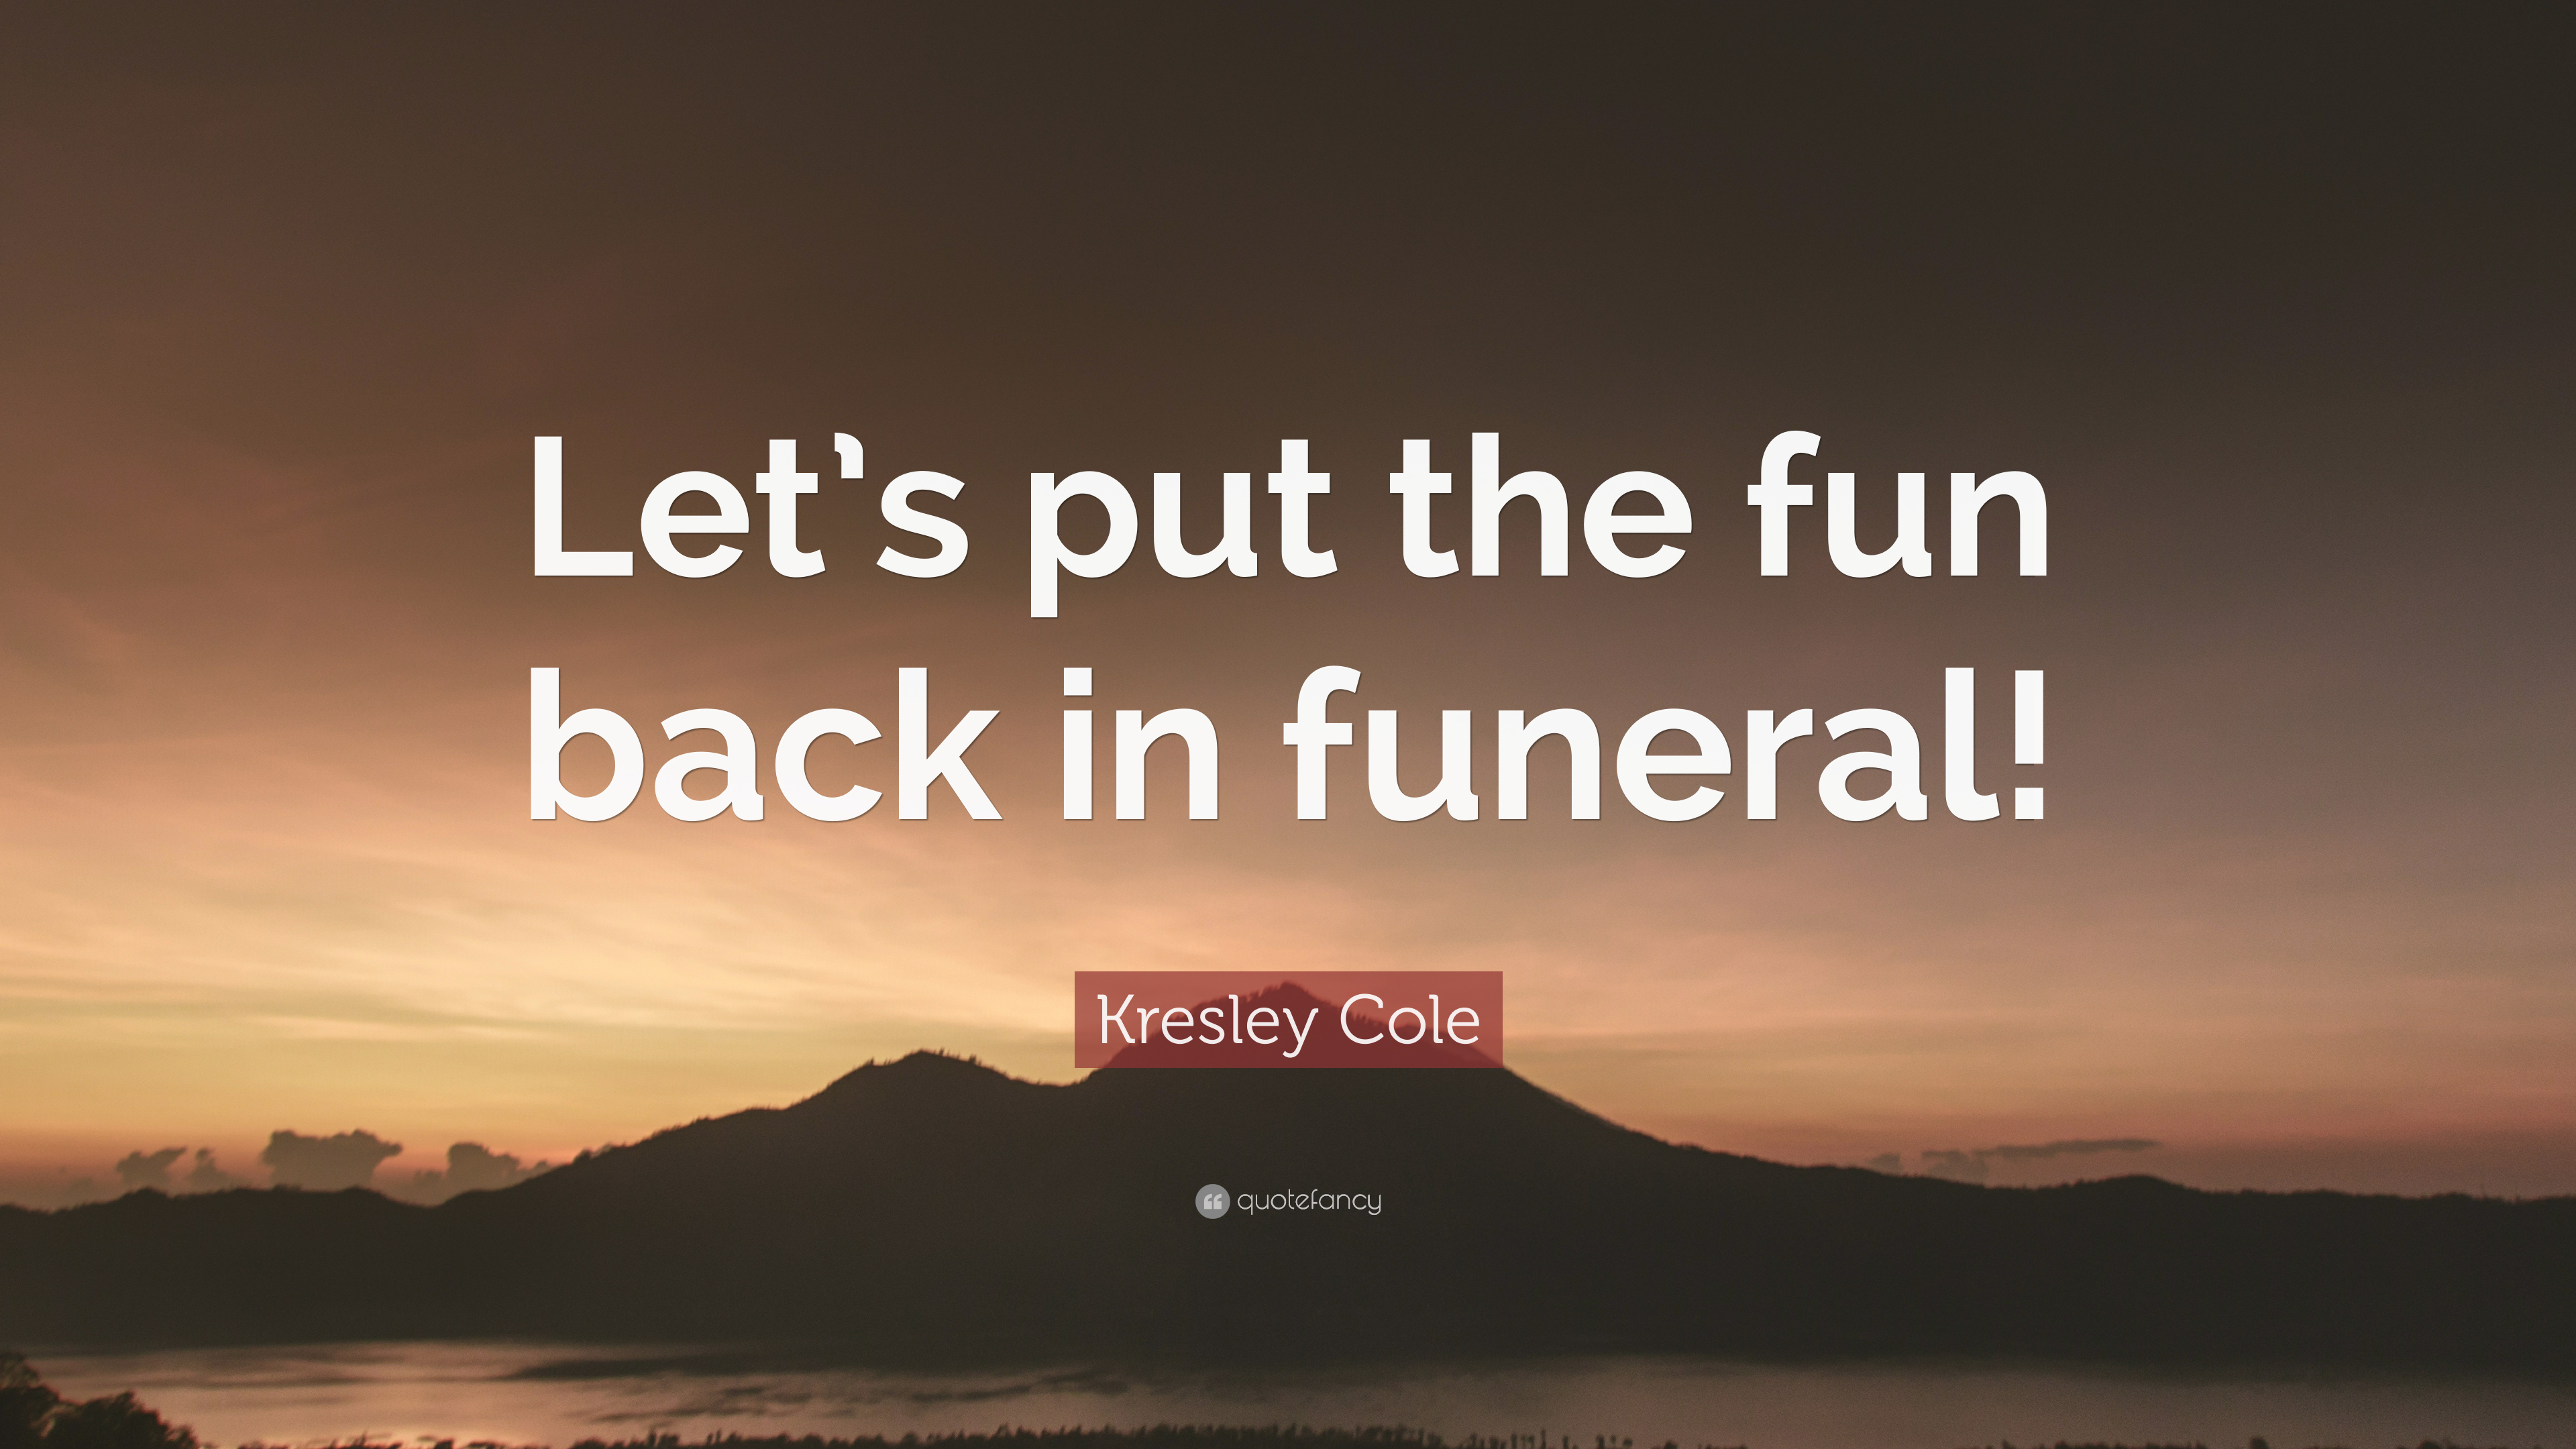 Kresley Cole Quote: “Let's put the fun back in funeral!” 7